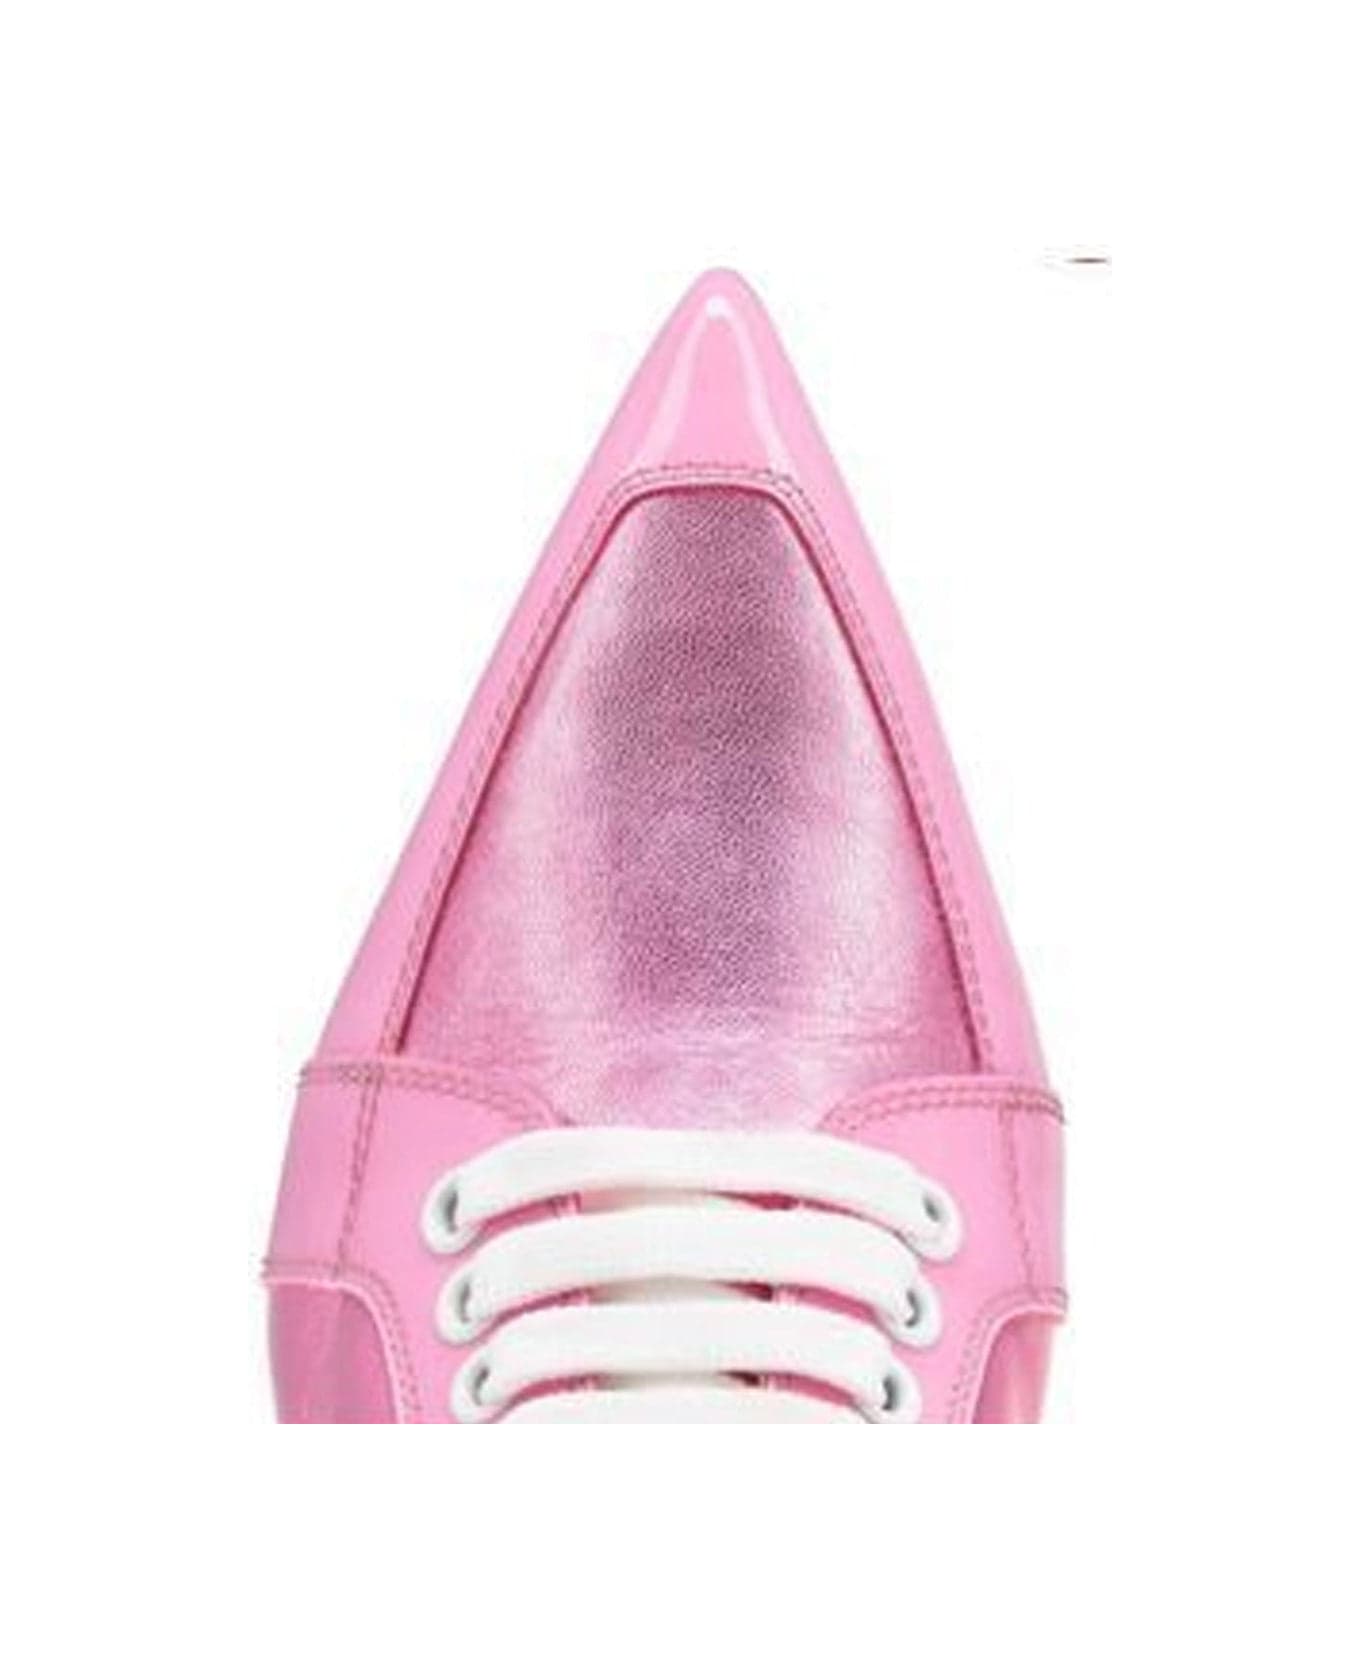 Christian Louboutin Leather Pumps - Pink ハイヒール